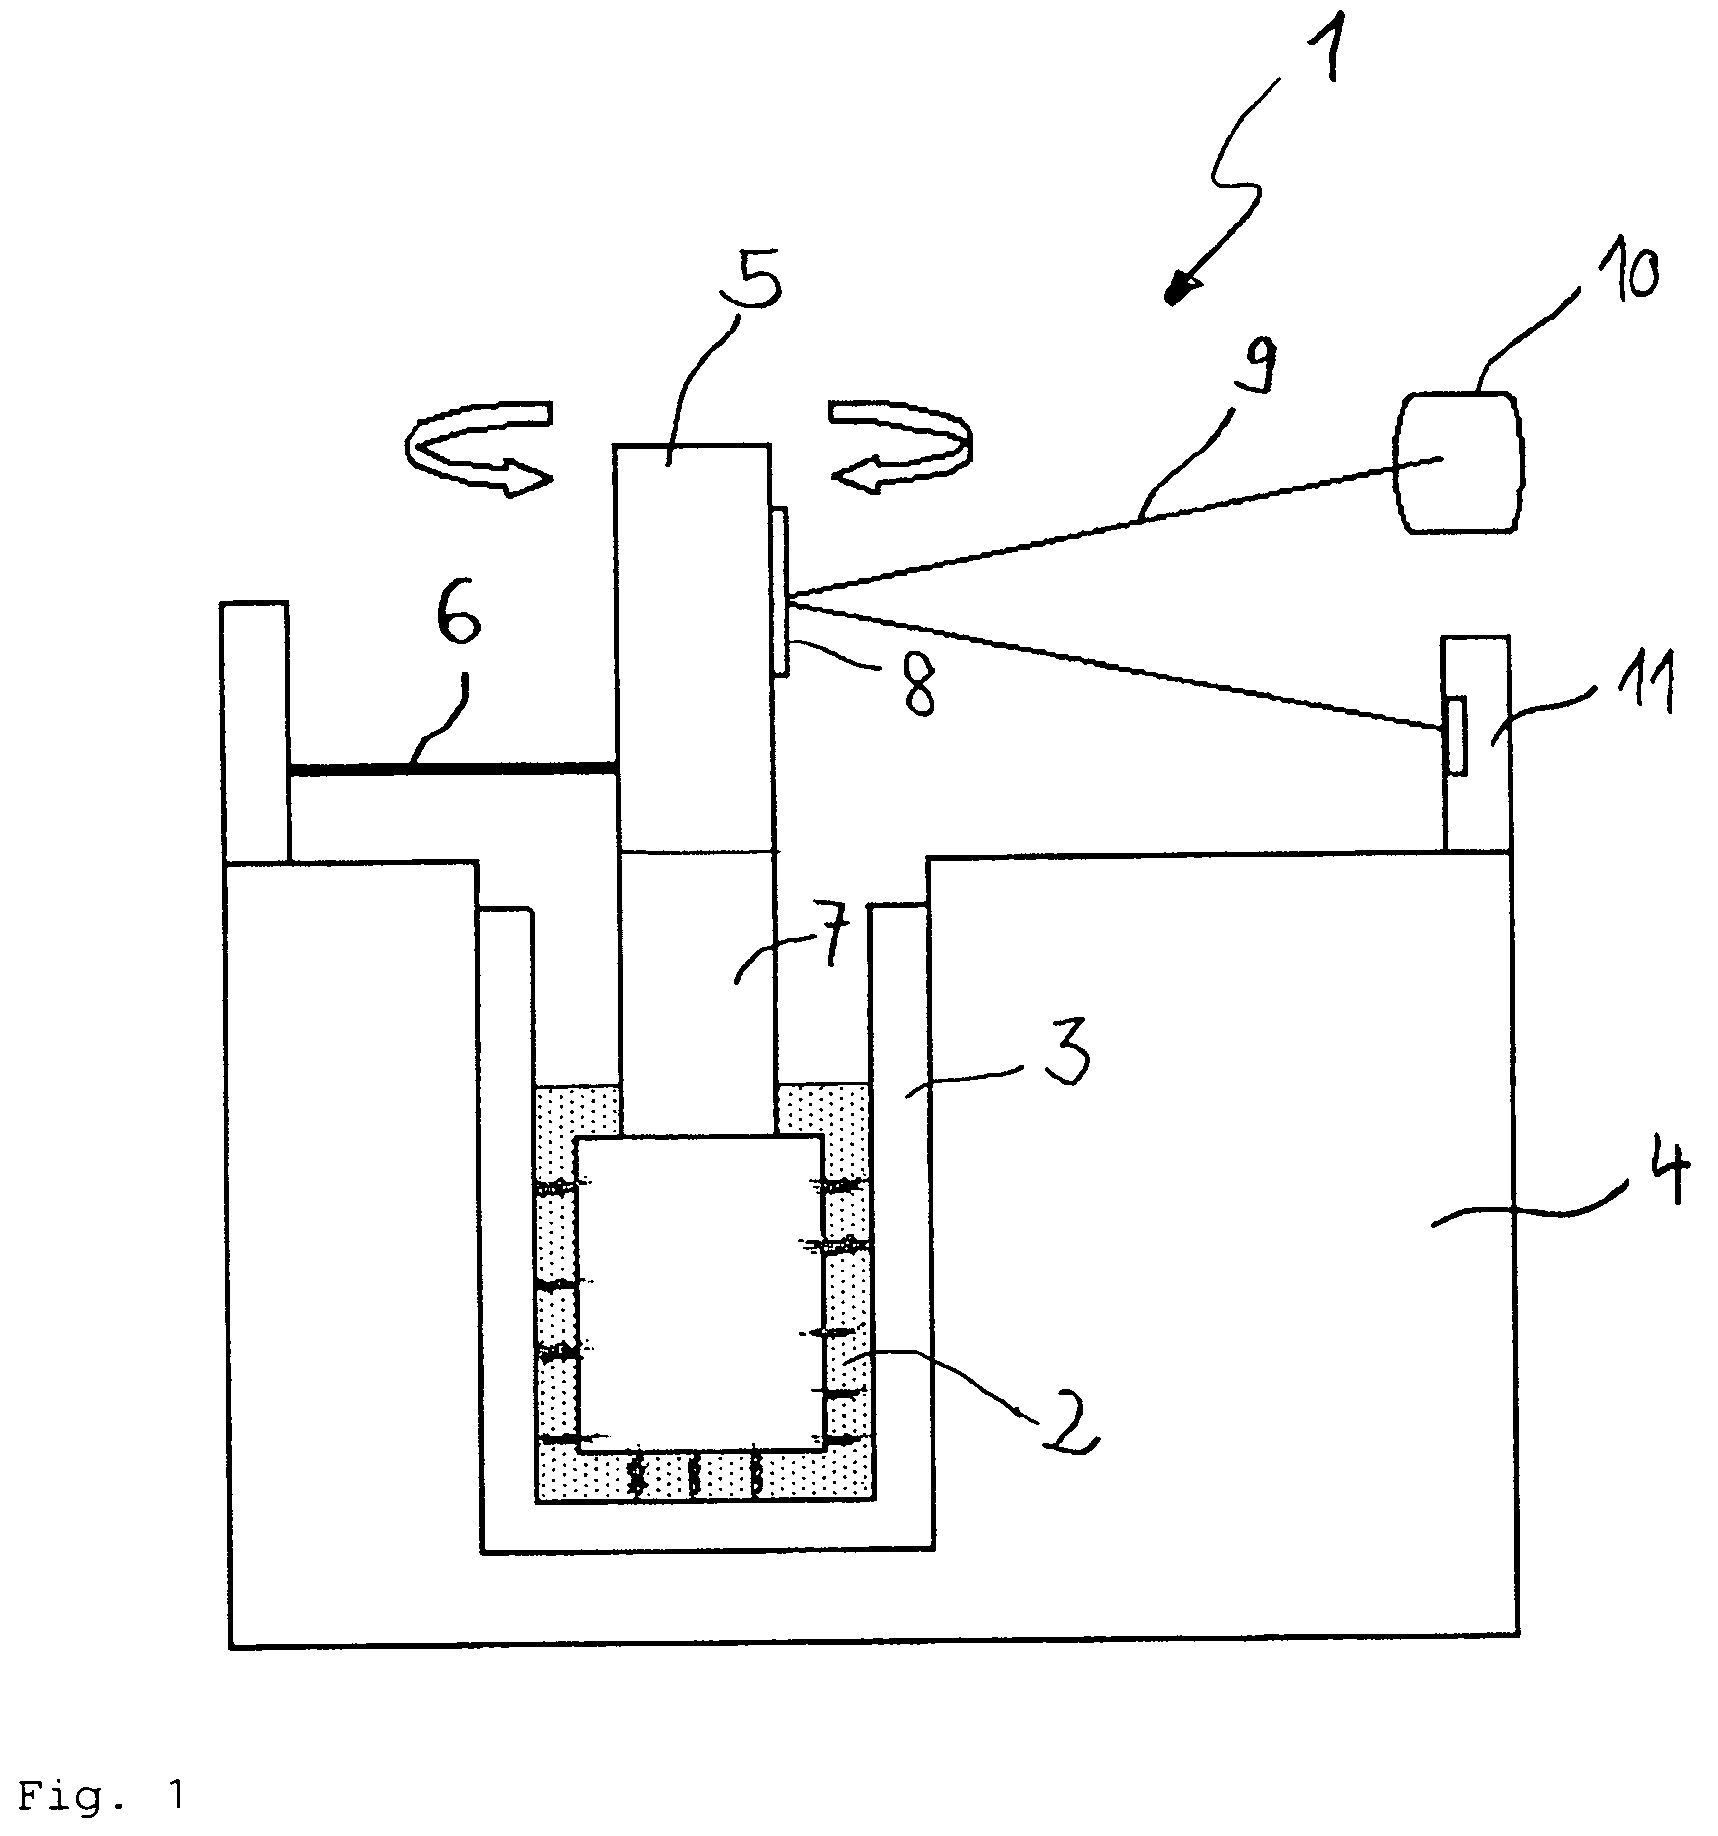 Device with novel and improved surface properties